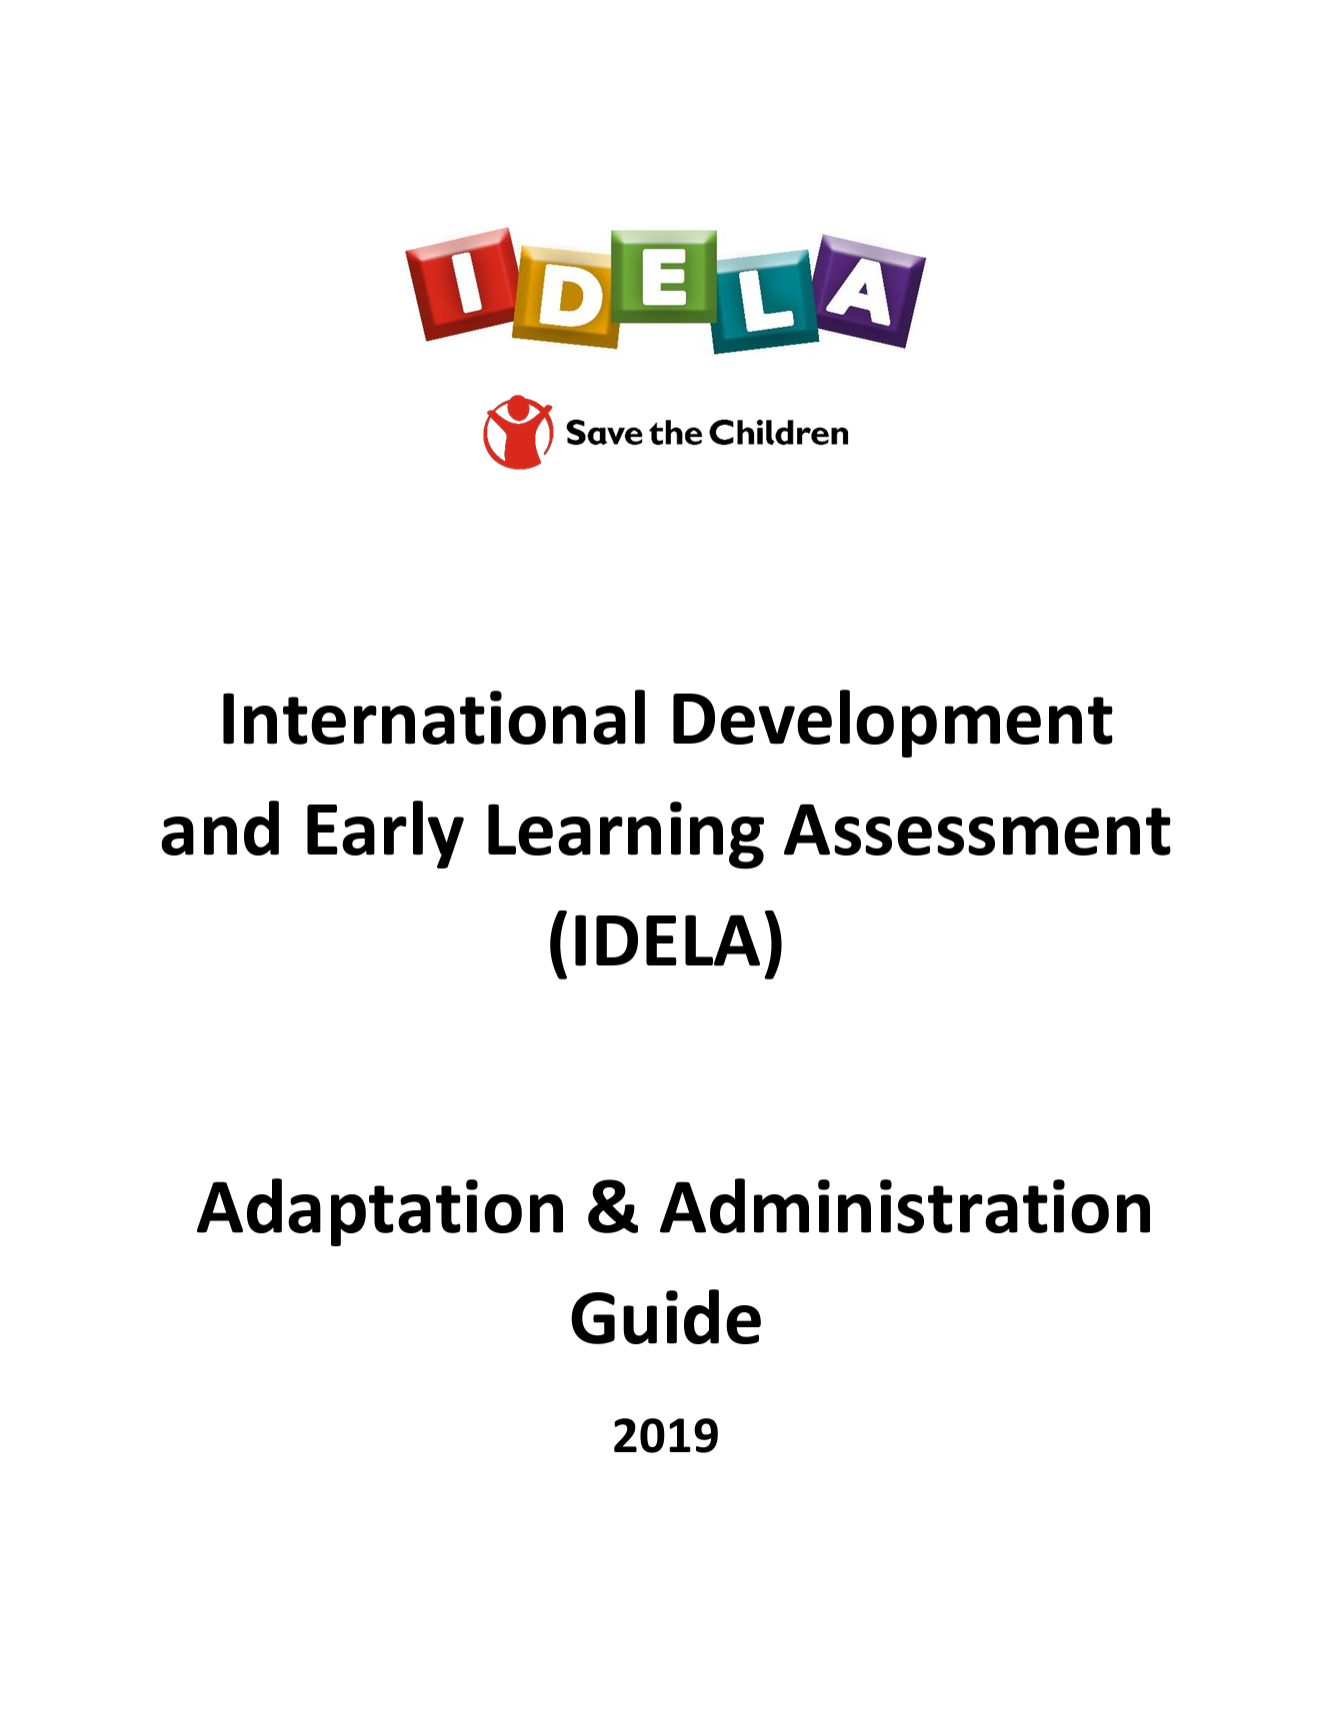 IDELA - The International Development and Early Learning Assessment